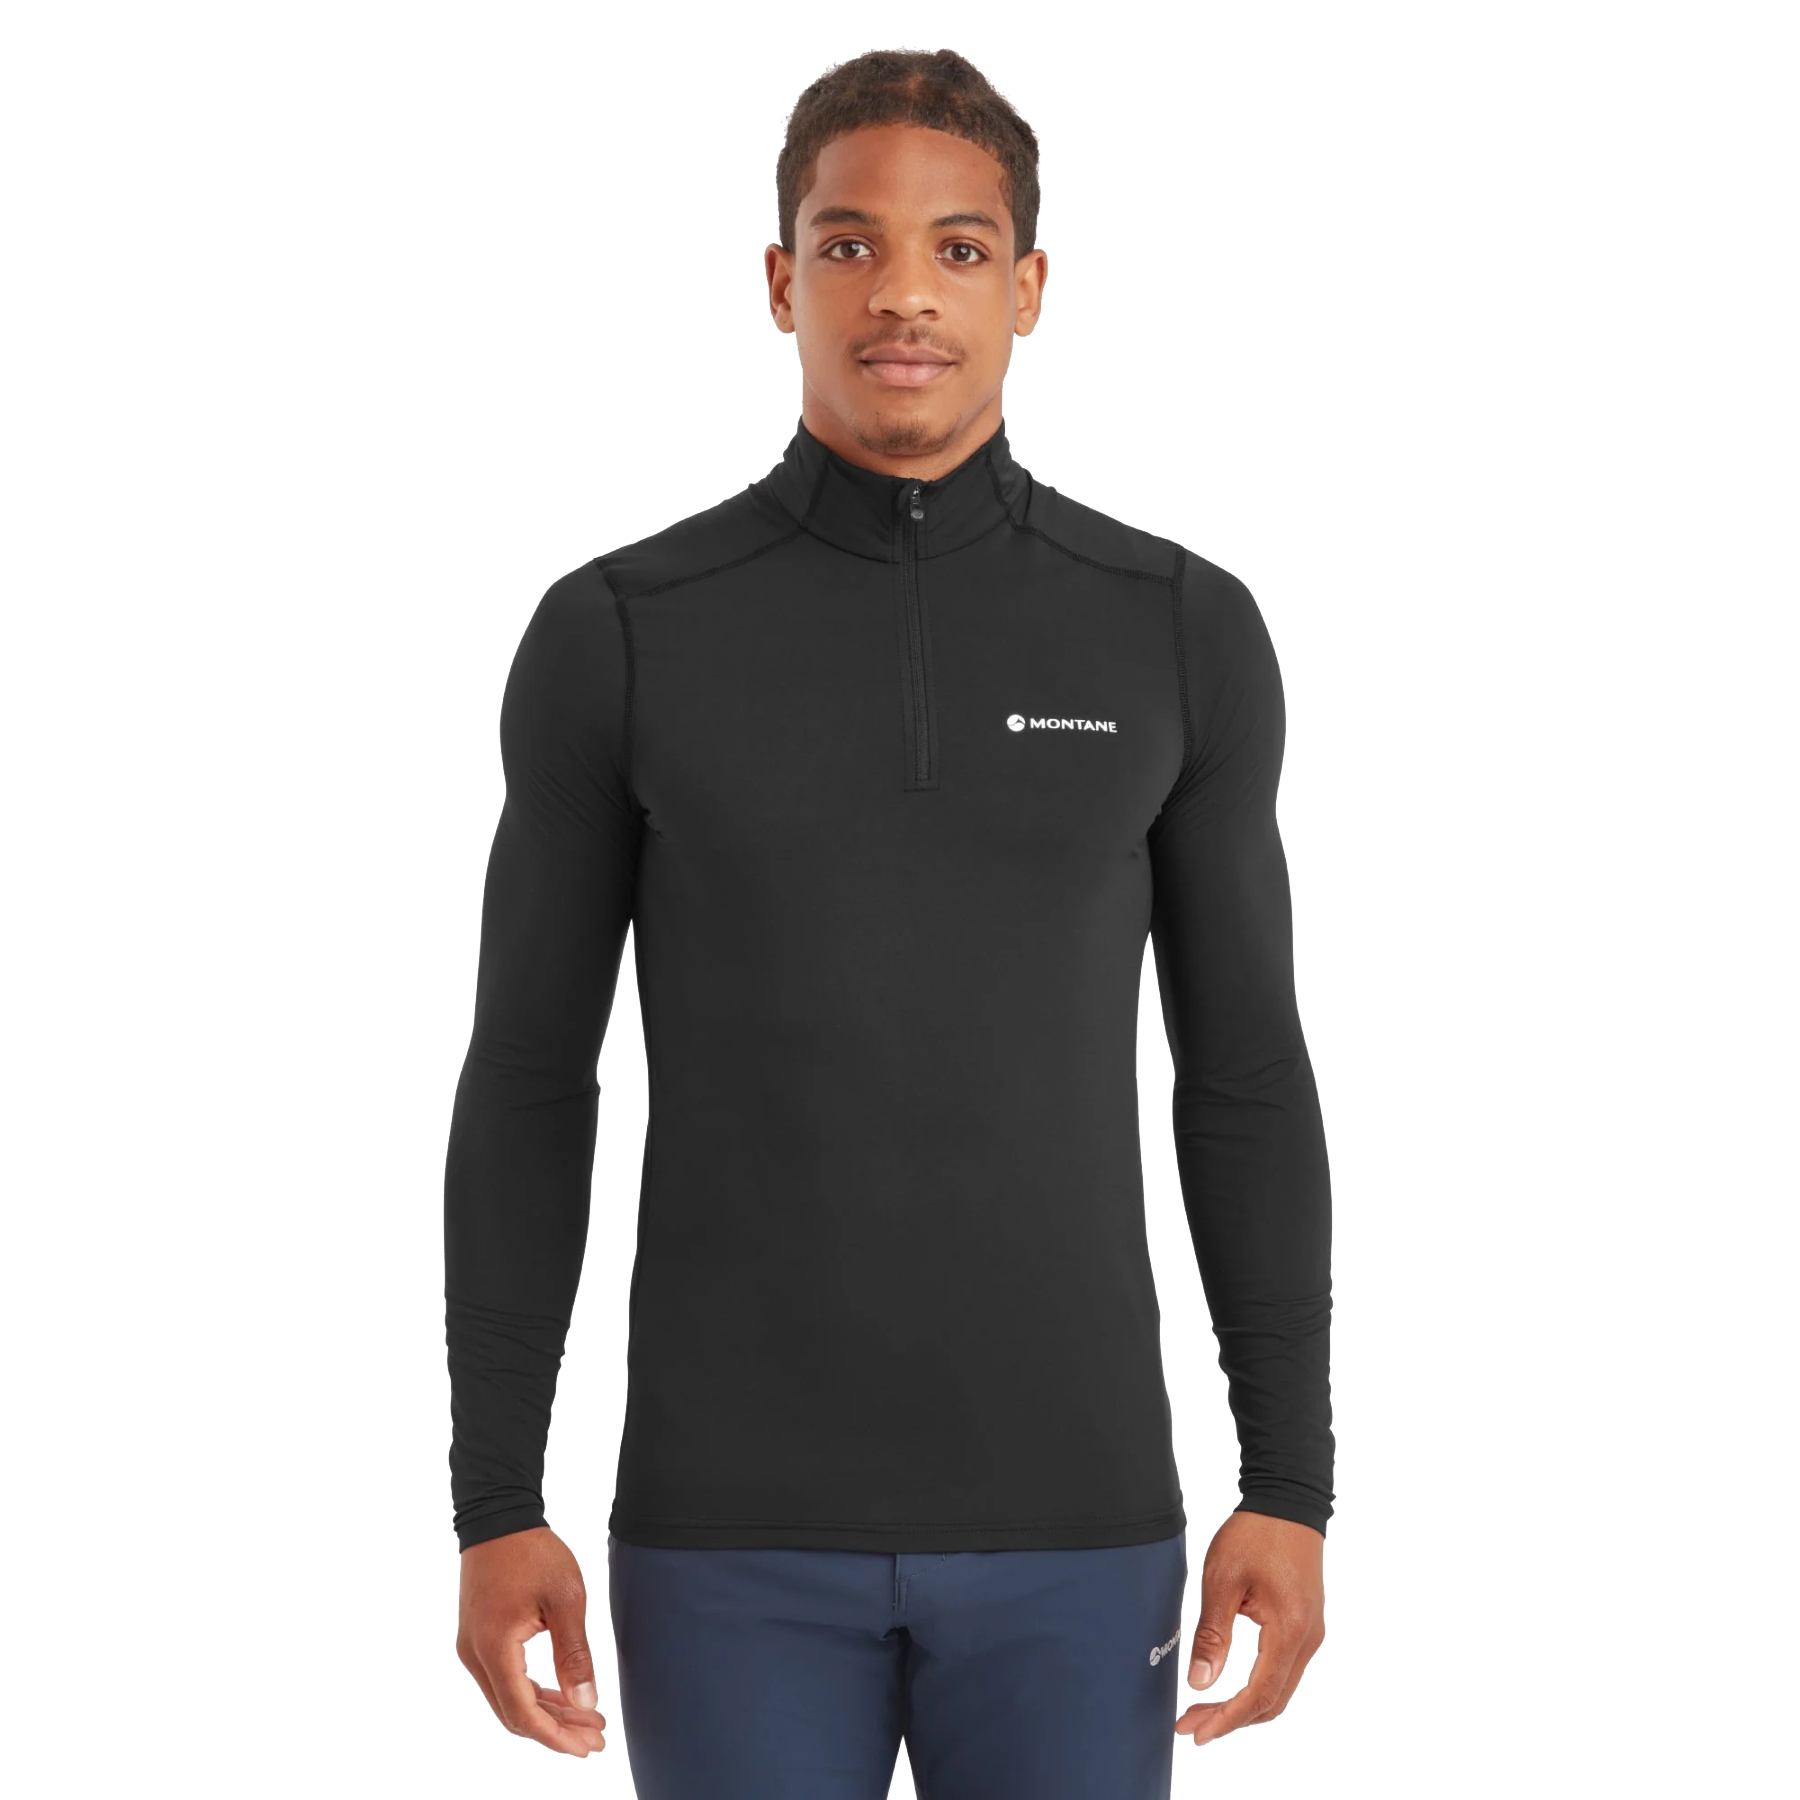 Picture of Montane Dart XT Thermal Zip Neck Long Sleeved Top - black